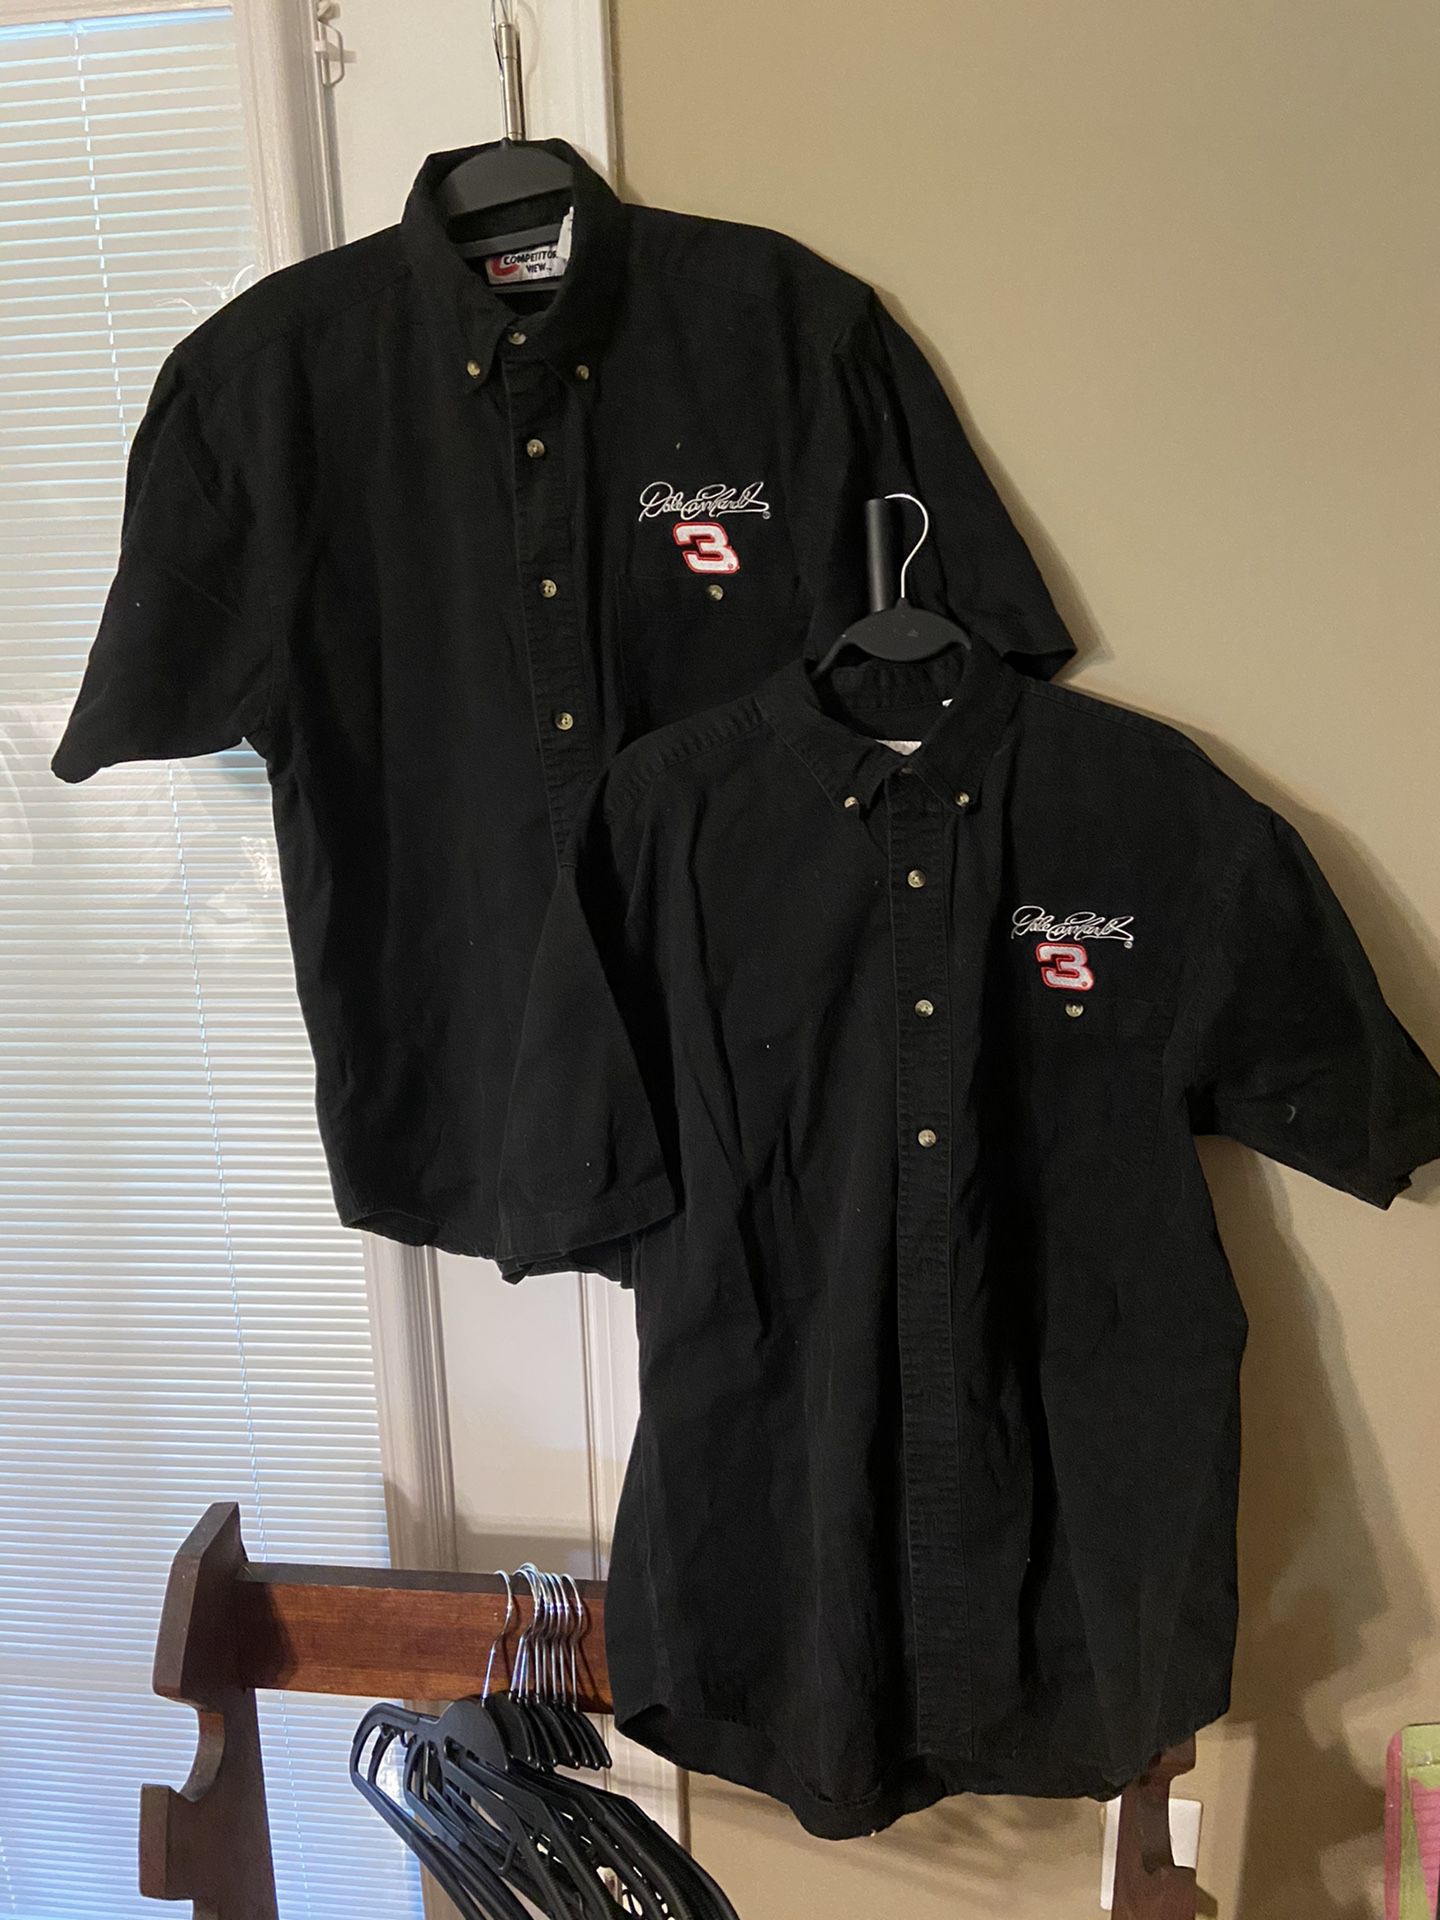 Dale Earnhart Men’s shirts Size Xl and Med